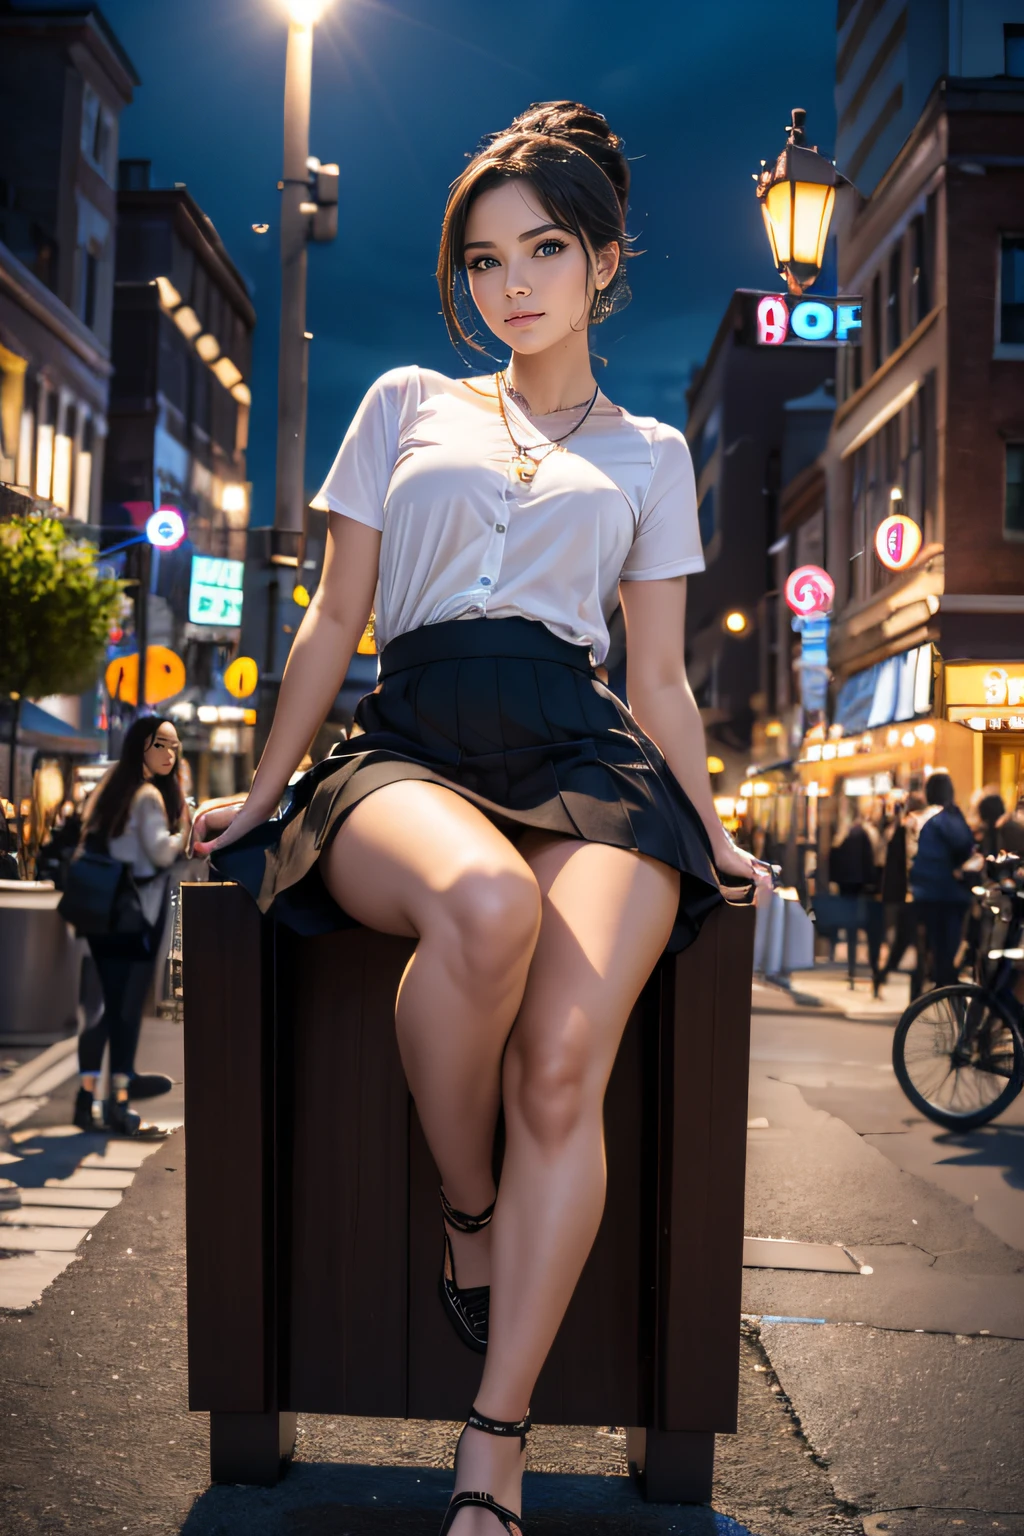 high-definition images, atmospheric perspective, 8k, super detail, accurate, best quality, ((angle from below)), a woman, ((round face), (drooping eyes)), blush, in the city, busy, clothes that emphasize body line, skirt, necklace, takes a seat, open legs, climbing on the top of backrest of the chair to hit the front of crotch, (other customers), night scene, foods, hair up,